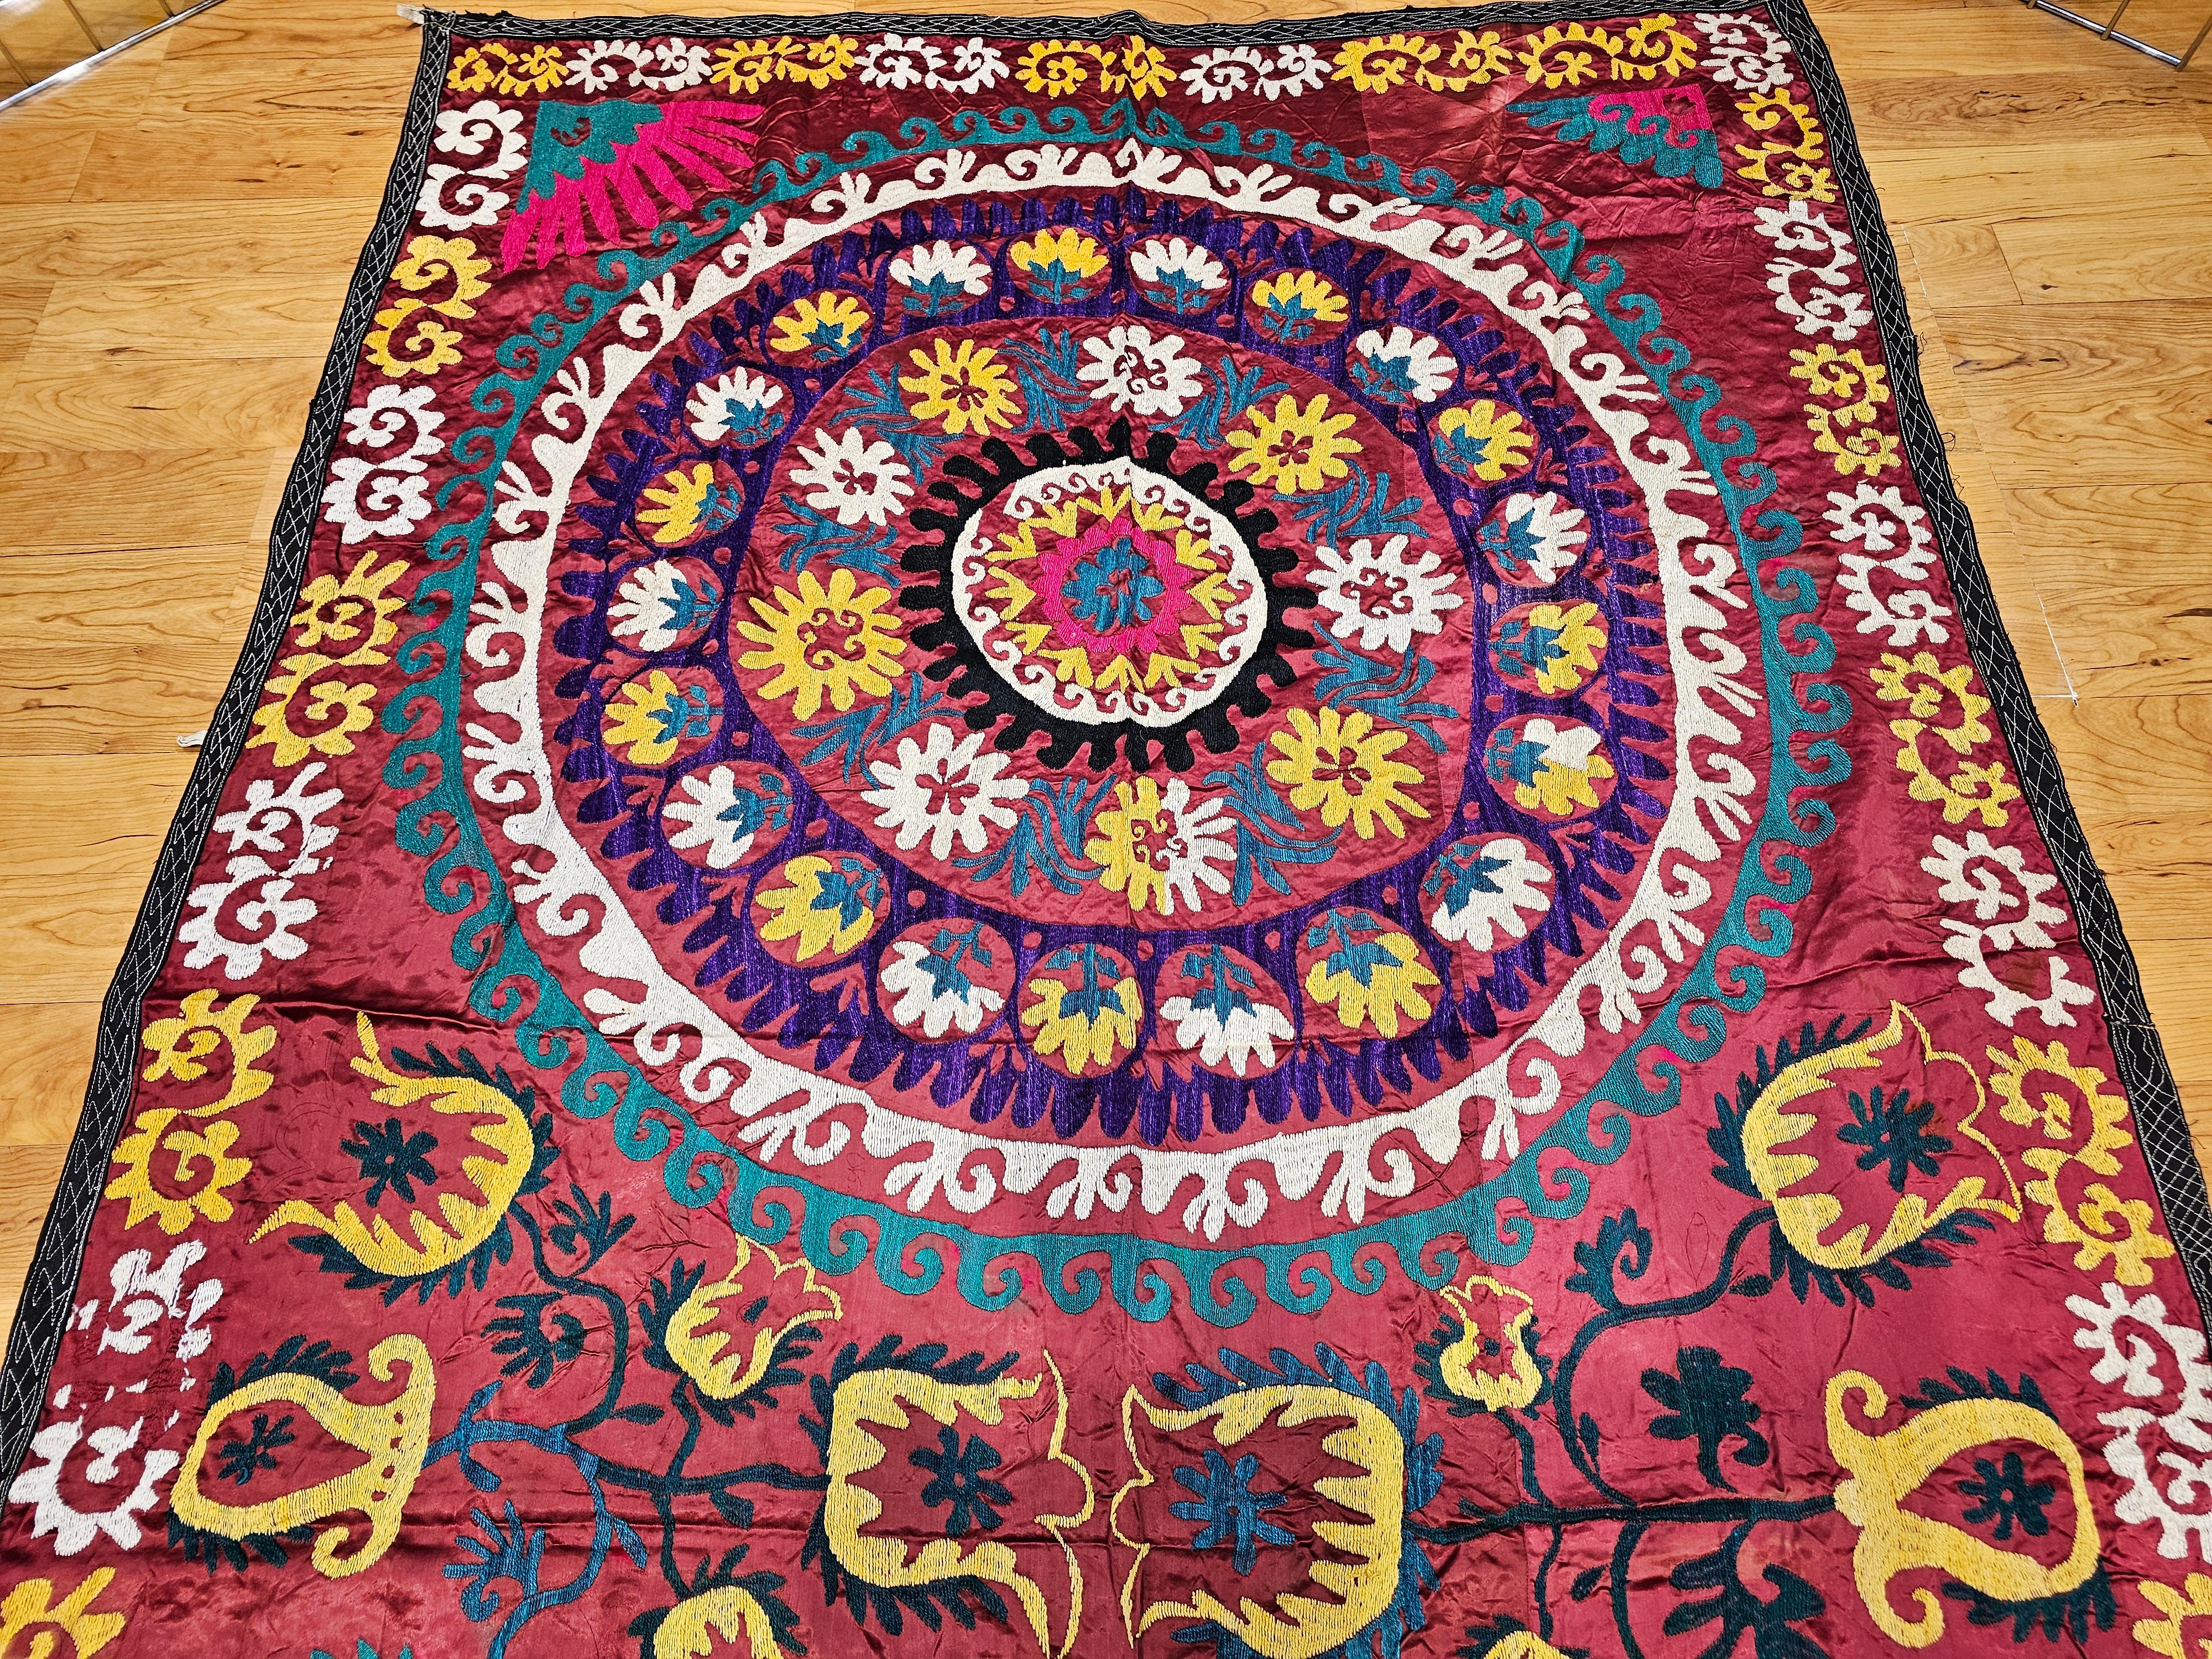 Hand-Crafted Vintage Uzbek Silk Embroidery Suzani in Red, Turquoise, Ivory, Yellow, Purple For Sale